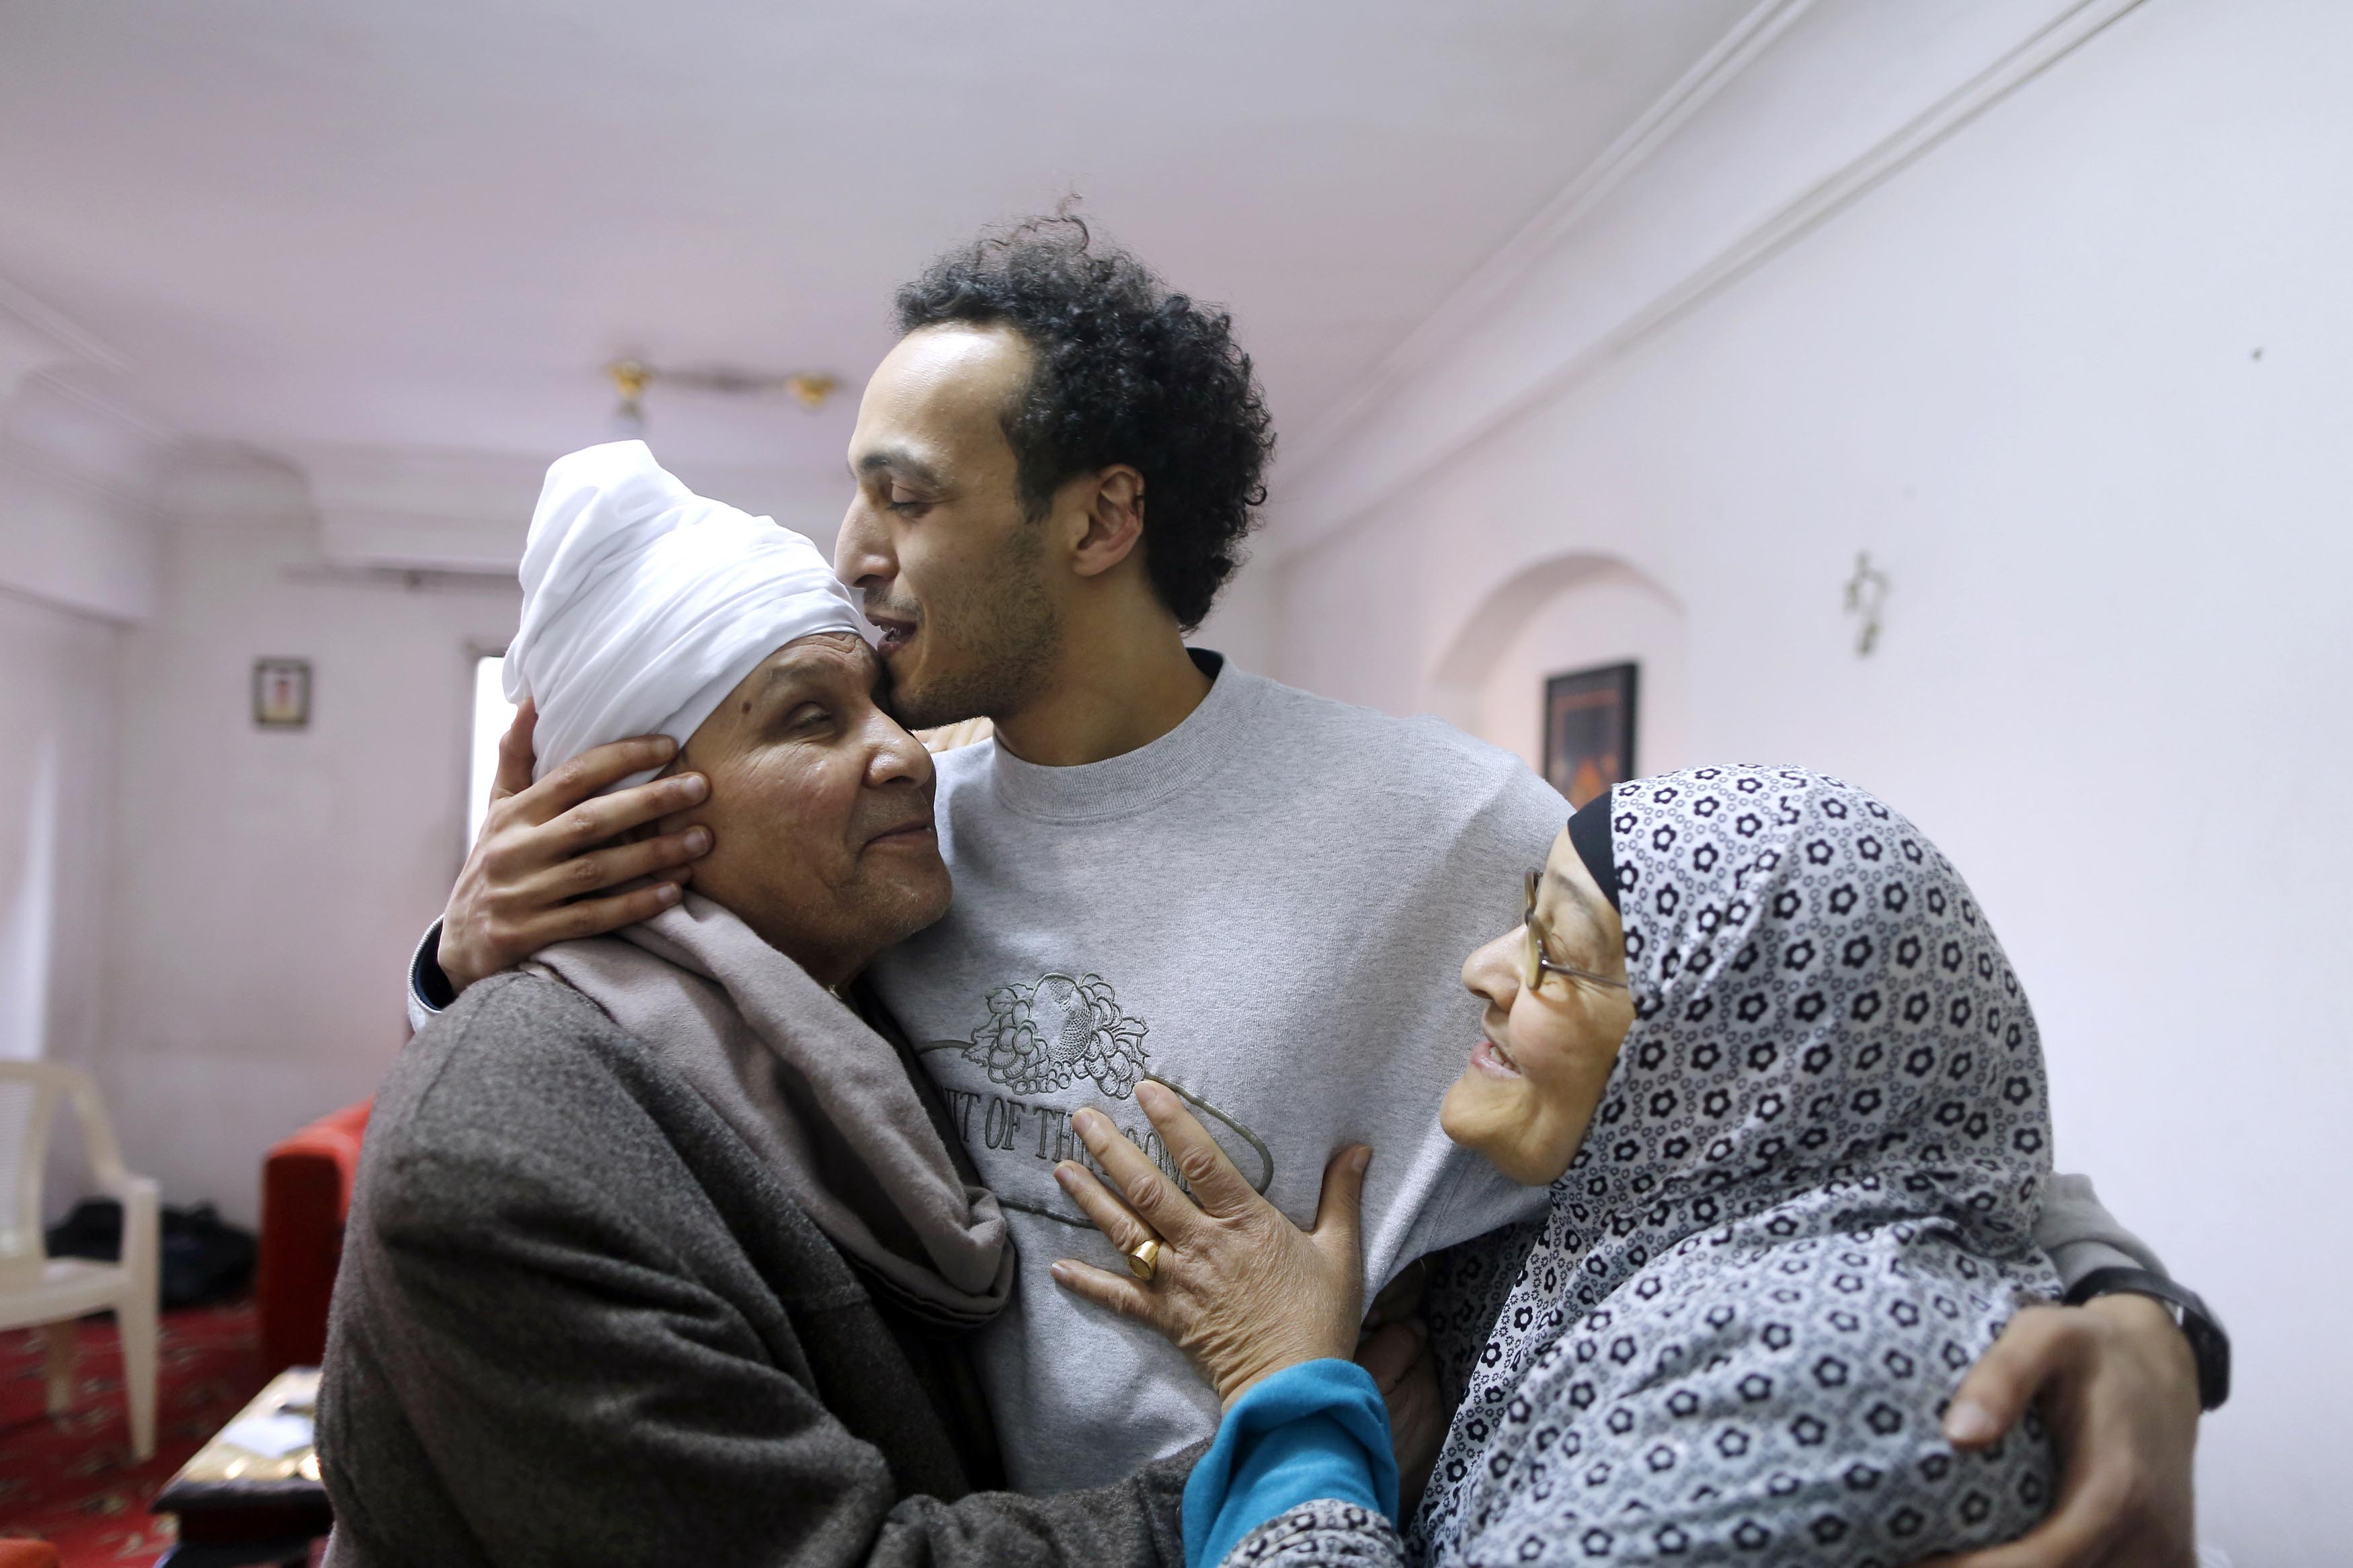 Mahmoud Abu Zaid, a photojournalist known as Shawkan, center, is hugged by his parents at his home in Cairo, Egypt, Monday, March 4, 2019. Shawkan was released after after five years in prison. Photo: AP